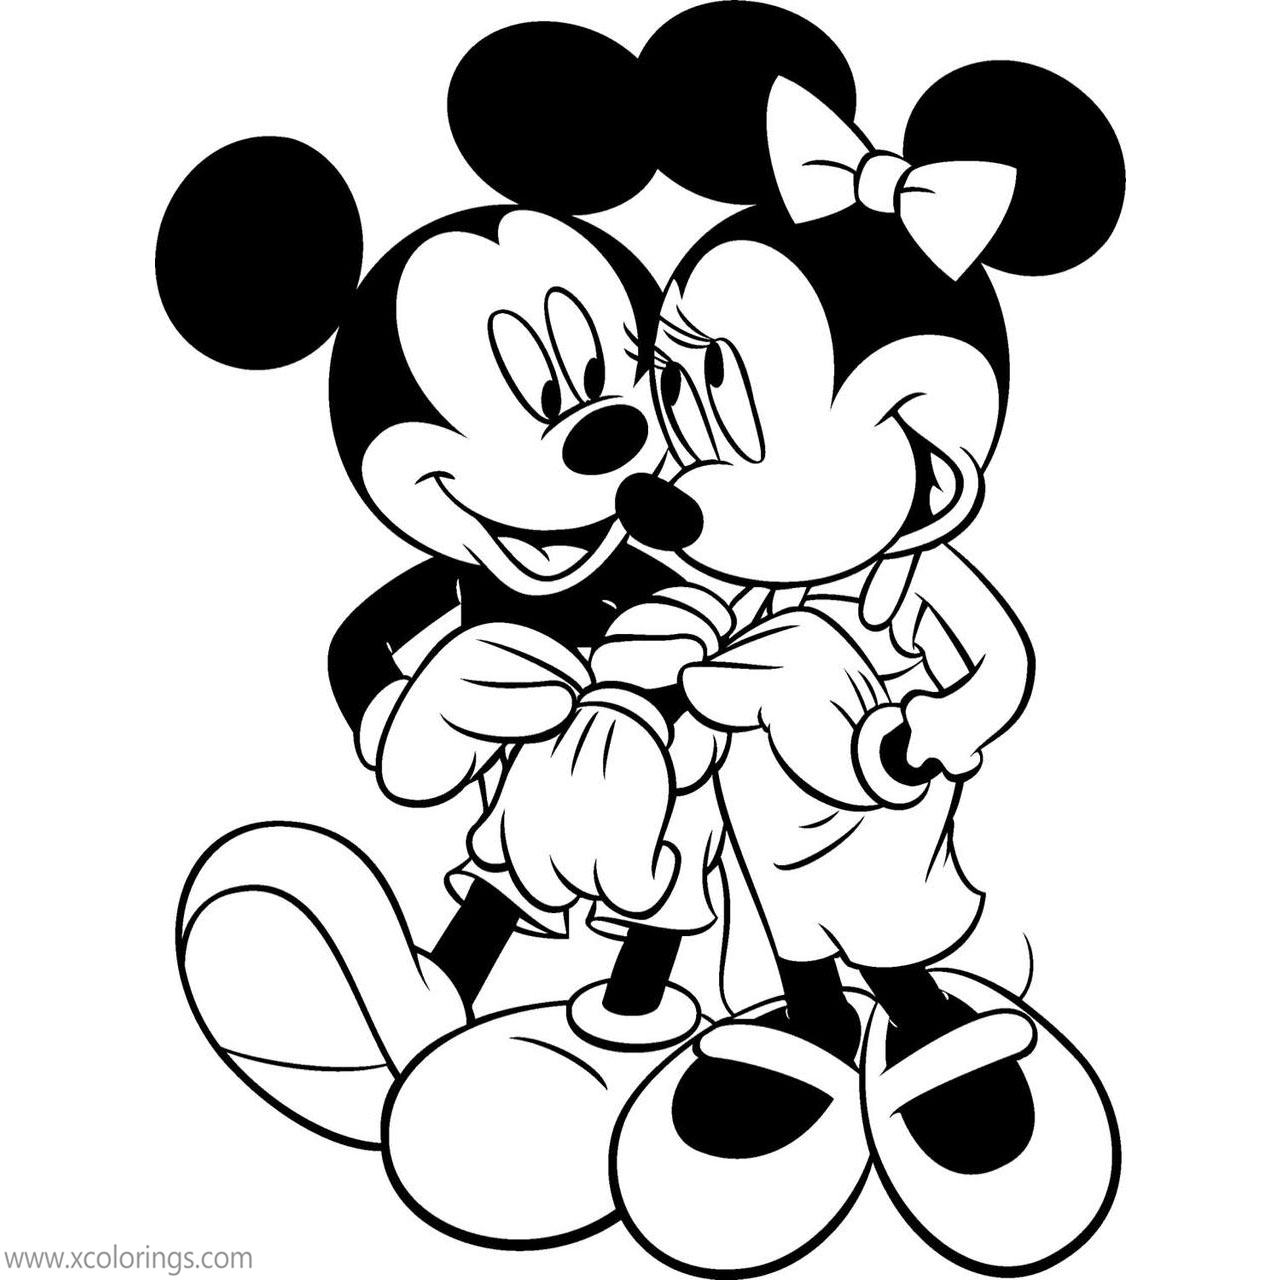 Free Mickey Mouse and Minnie Mouse Valentines Day Coloring Pages printable